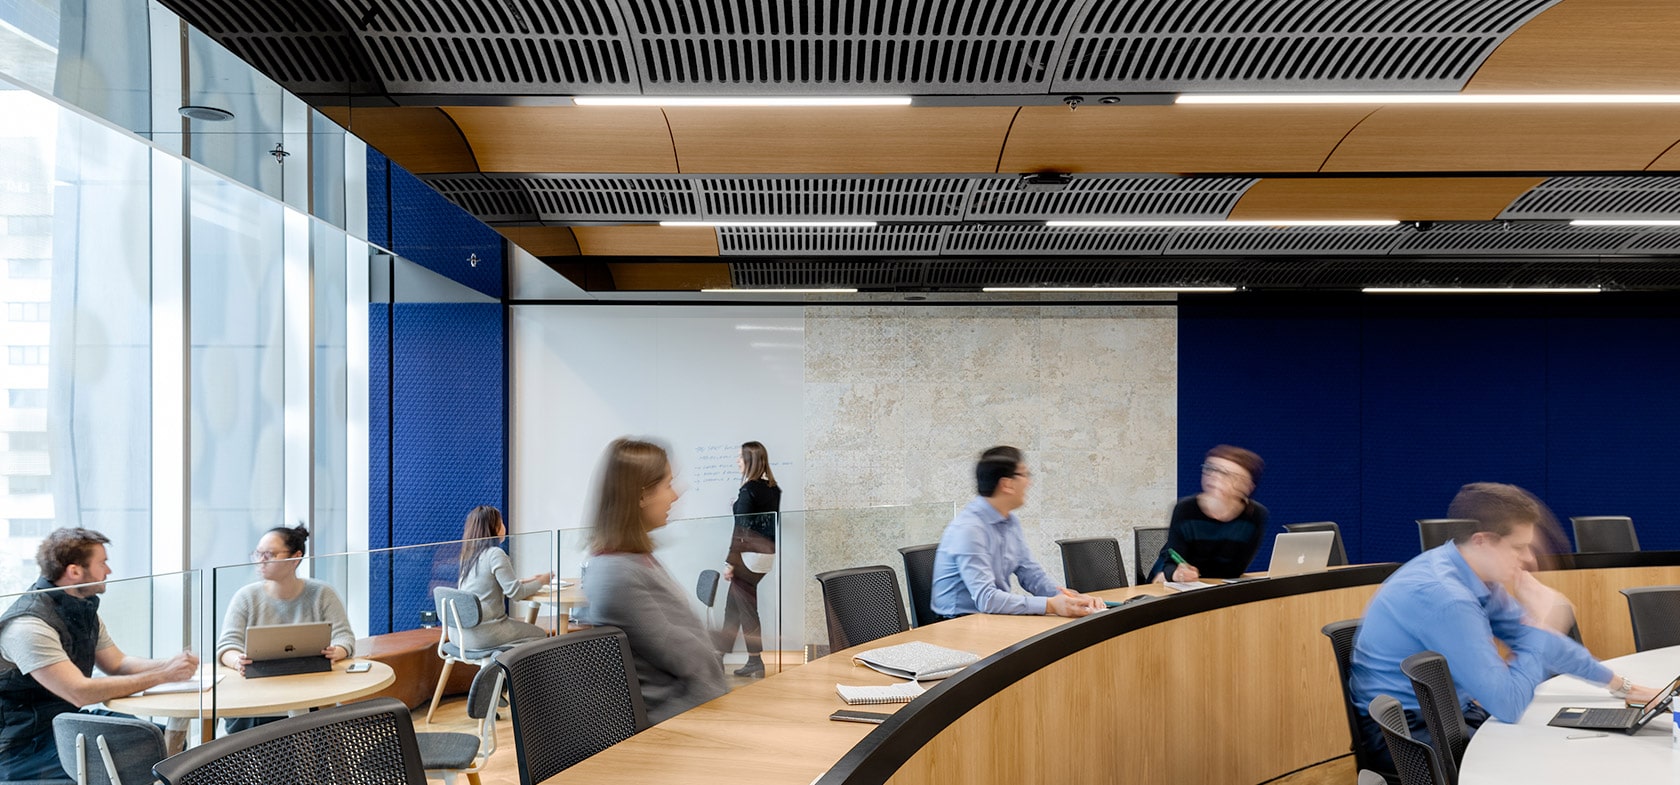 University of Melbourne Lecture Theatre Design & Fitout with Students and feature ceiling